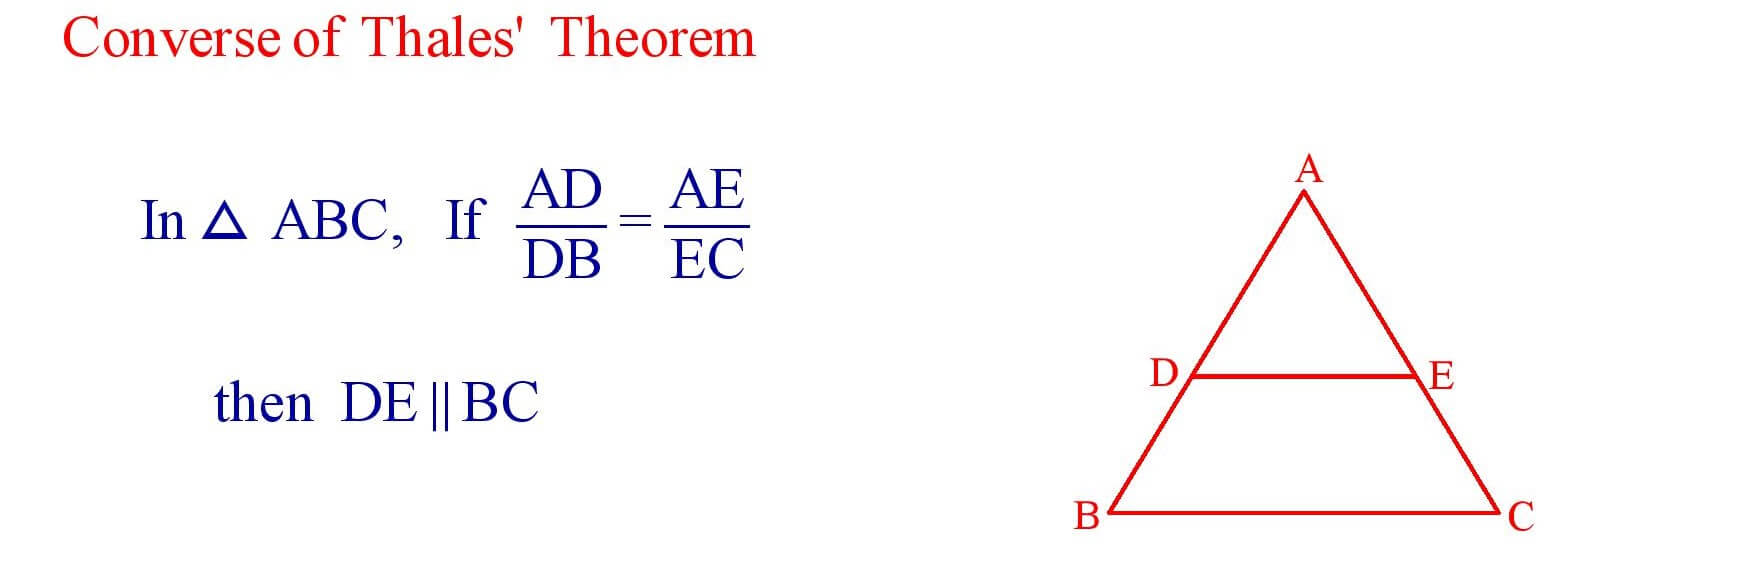 Converse of Thales Theorem